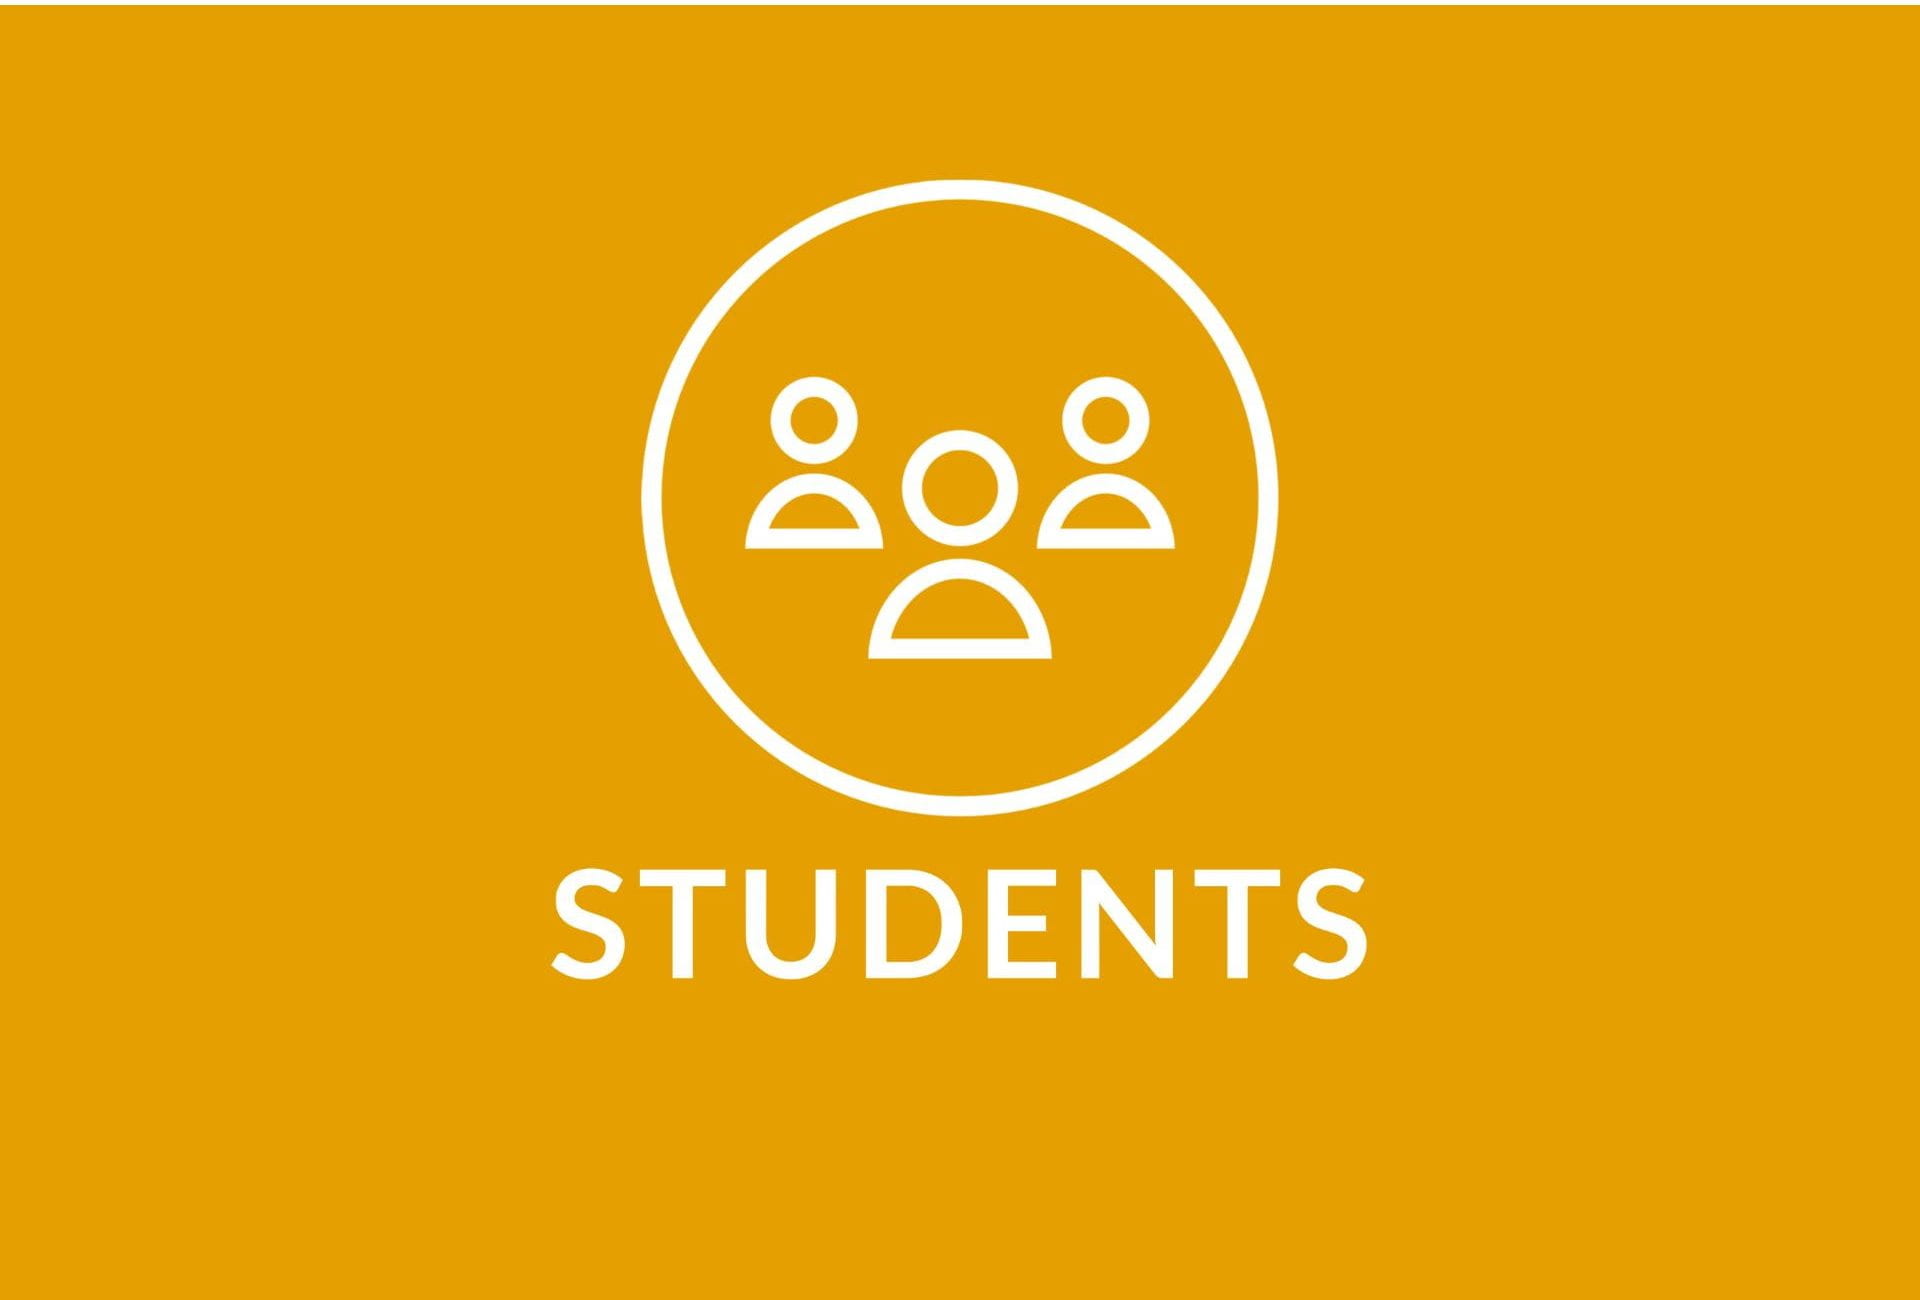 Orange rectangle with the word Students and an icon of a circle with three students in it